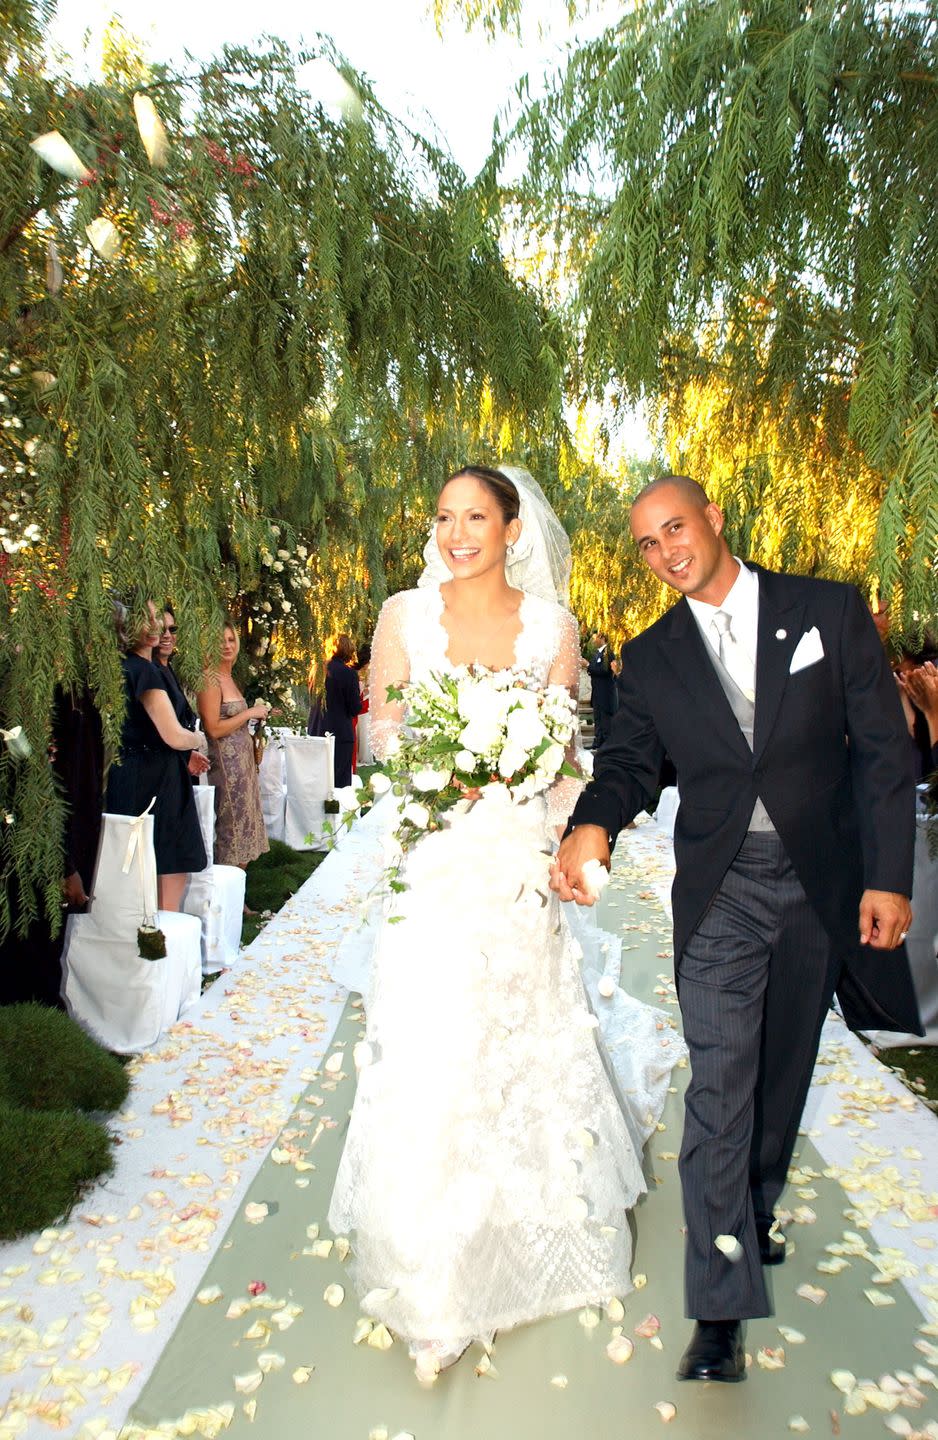 september 29, 2001 file photo of jennifer lopez and cris judd at the private residence in calabassas, ca photo by joe buissinkwireimage